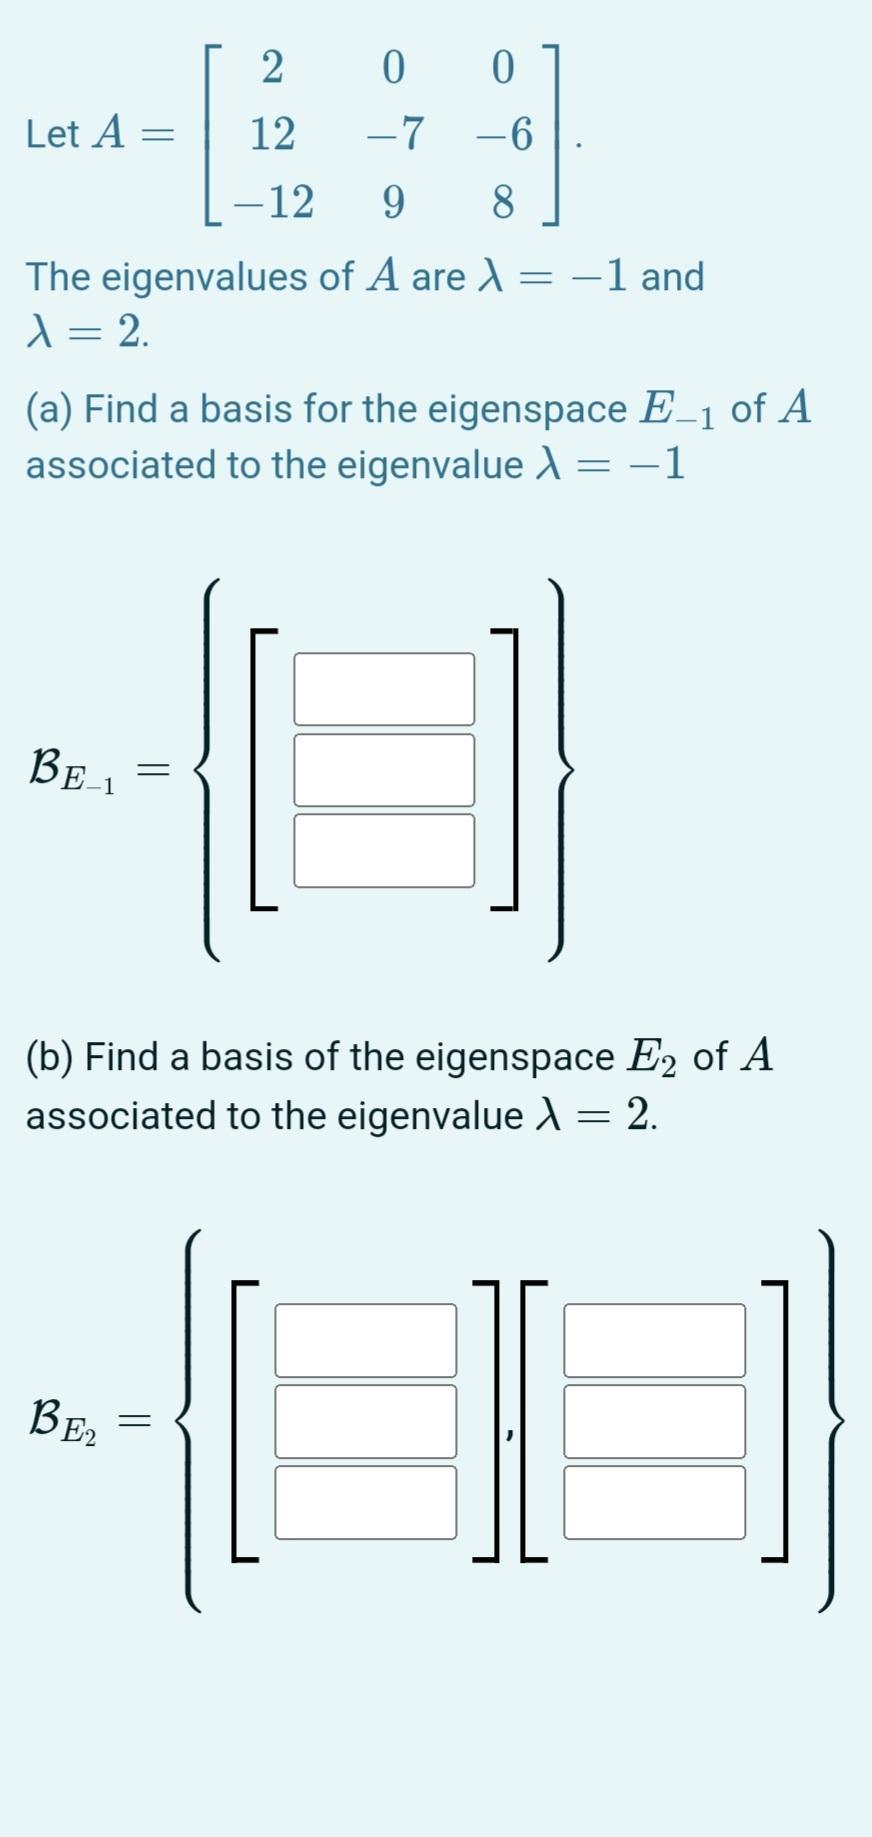 Let A = - The eigenvalues of A are  = -1 and >  = 2. (a) Find a basis for the eigenspace E-1 of A associated